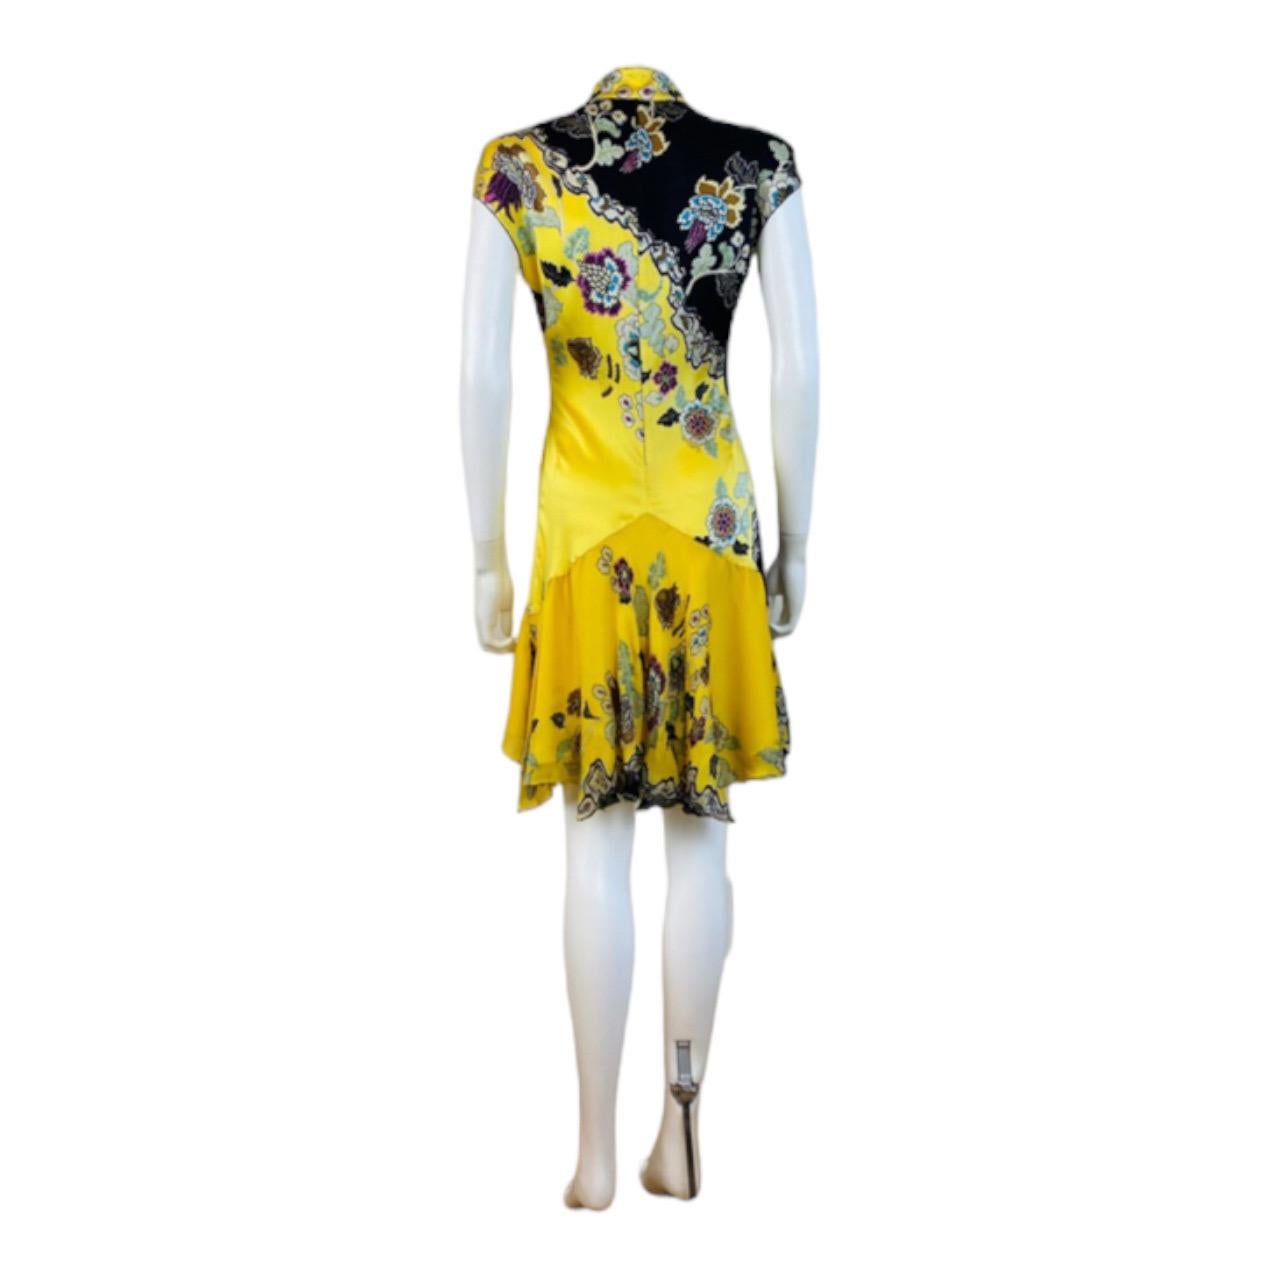 Vintage Roberto Cavalli S/S 2003 Chinoiserie Yellow Floral Silk Mini Dress For Sale 3